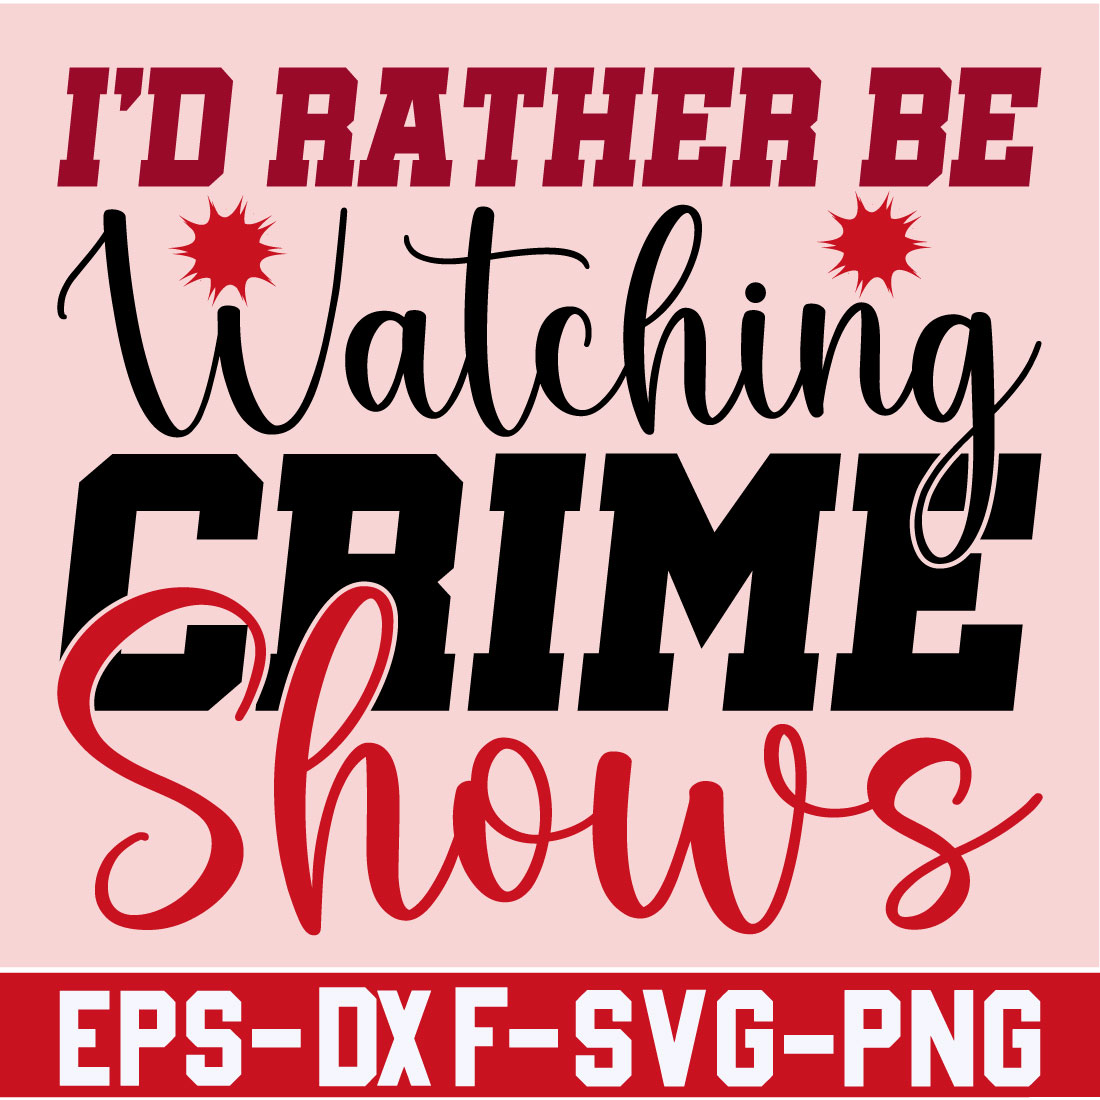 I'd rather Be Watching Crime Shows cover image.